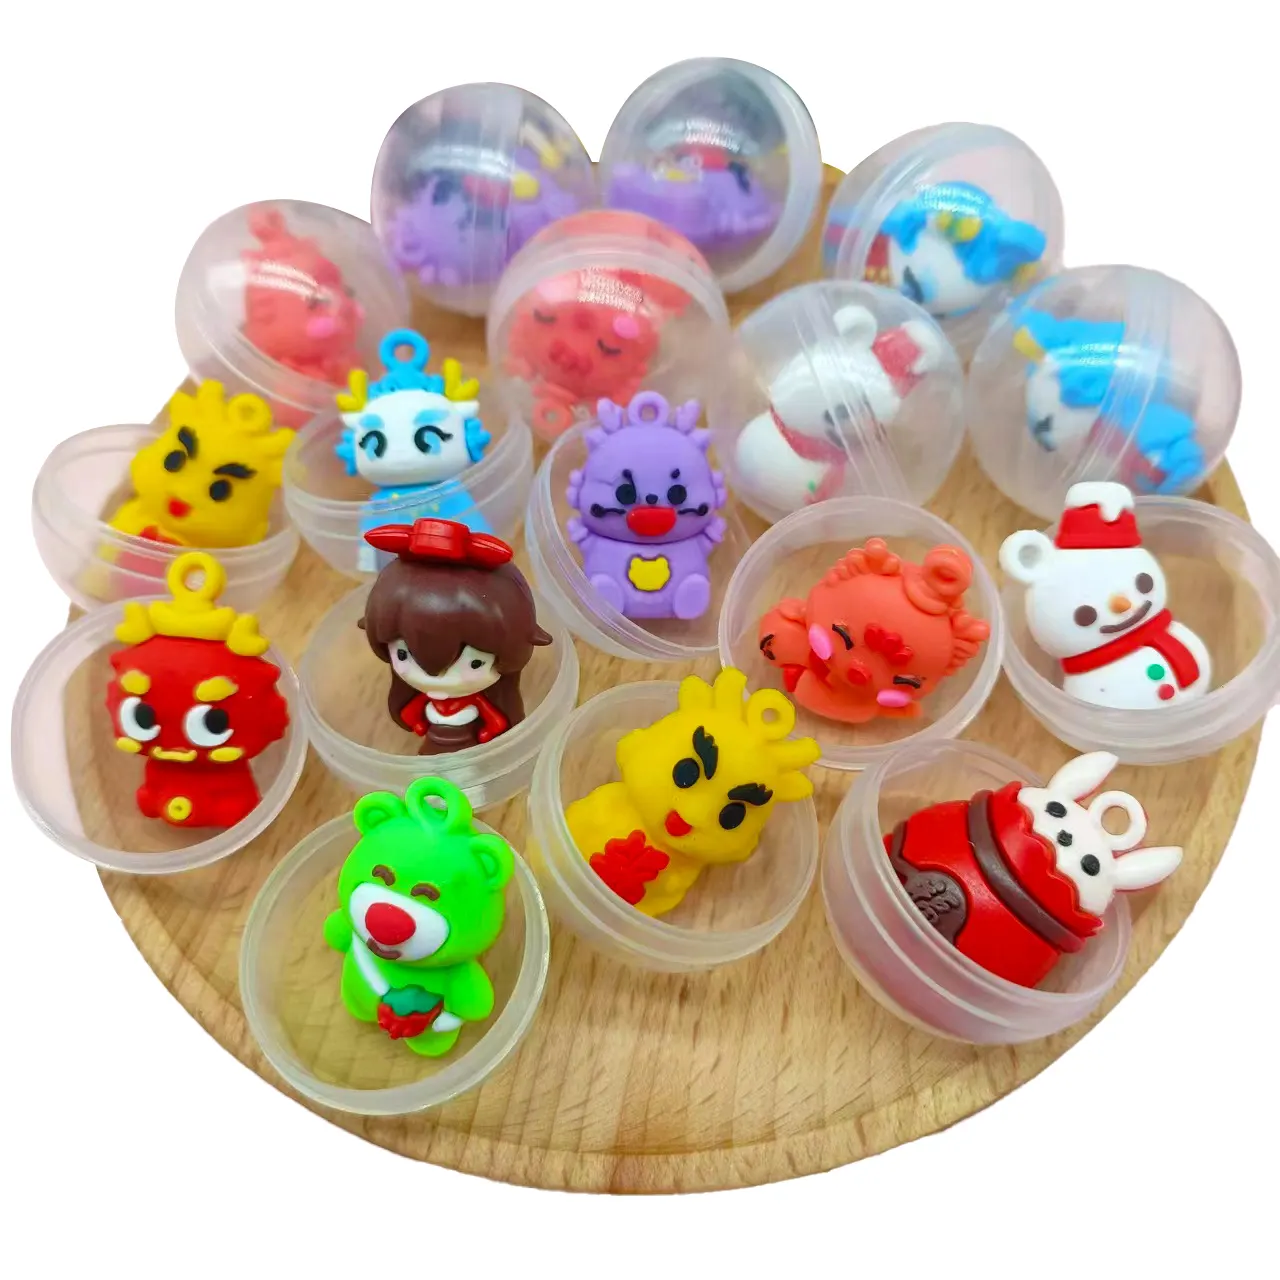 Transparent Twisted Egg Toy Capsule Round Ball Surprise Eggs with Mini Toys